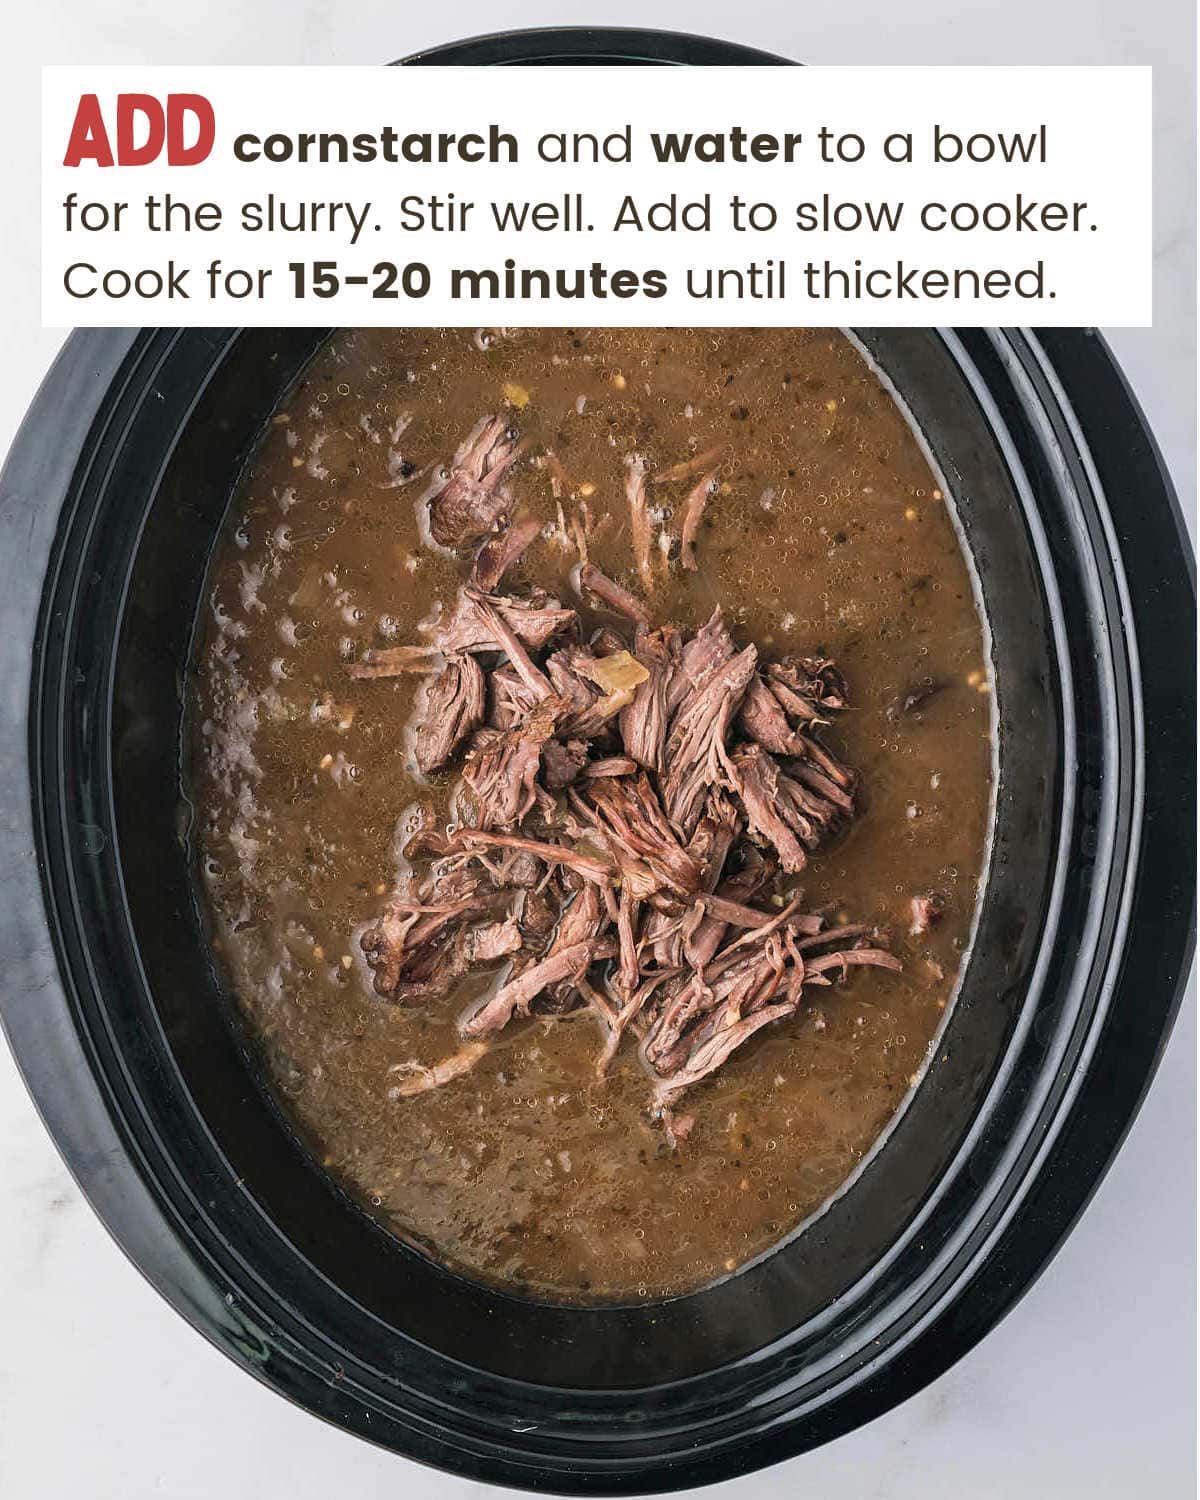 Shredded beef in slow cooker for Crock-Pot Beef and Noodles